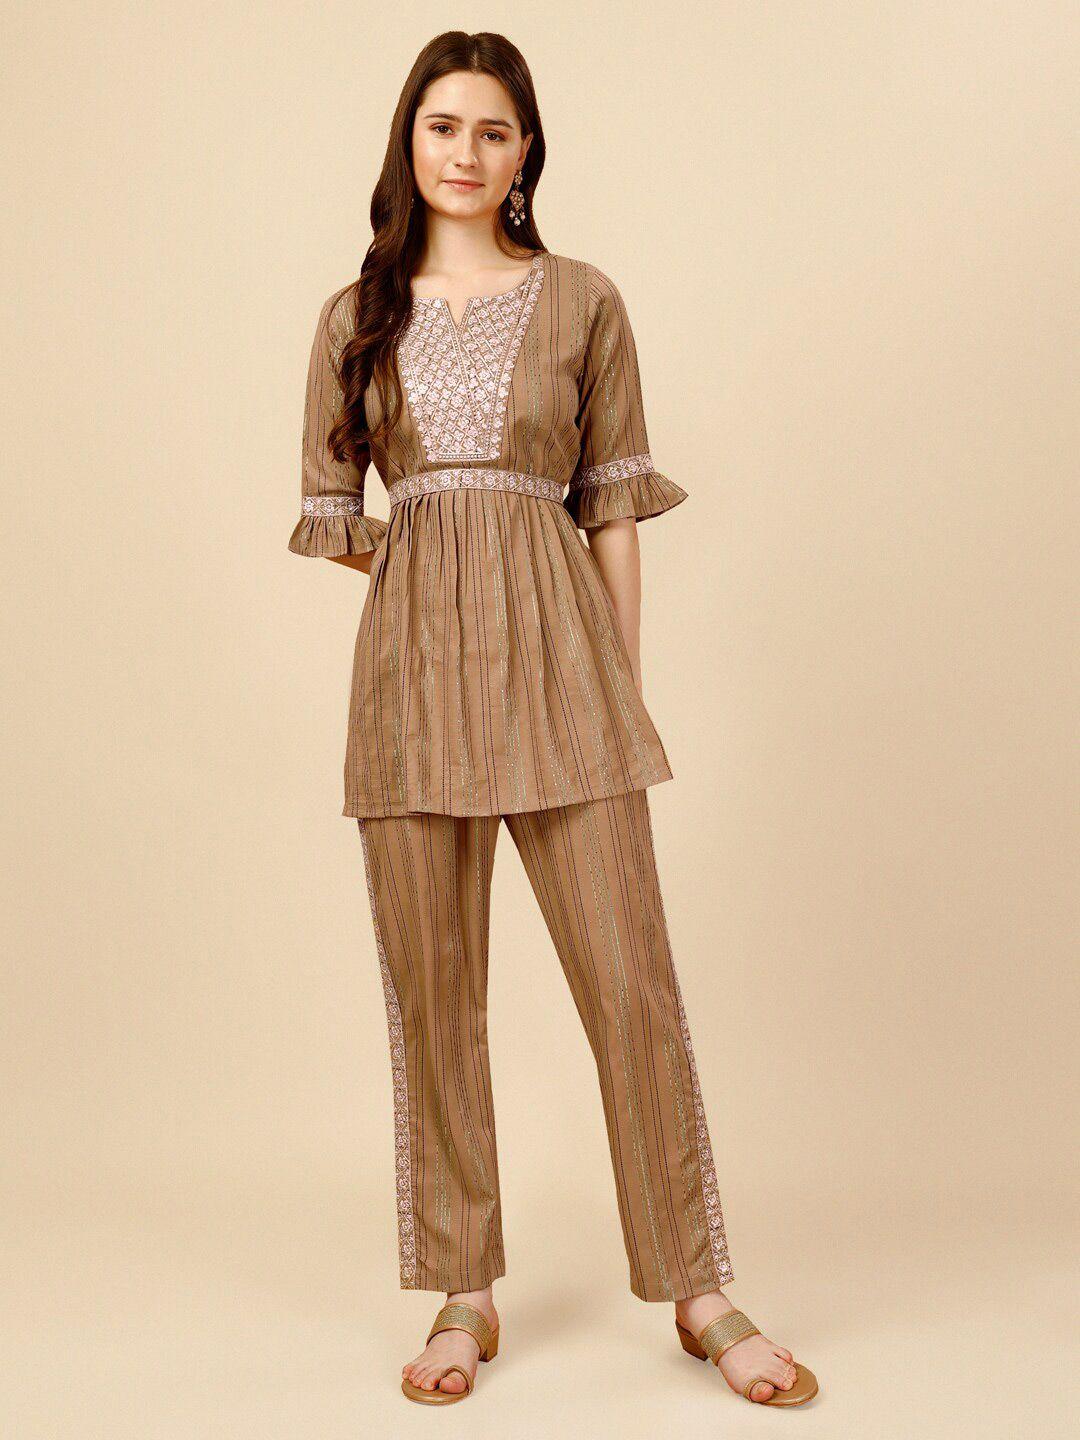 nainvish v-neck printed empire thread work pure cotton co-ord top & trousers set